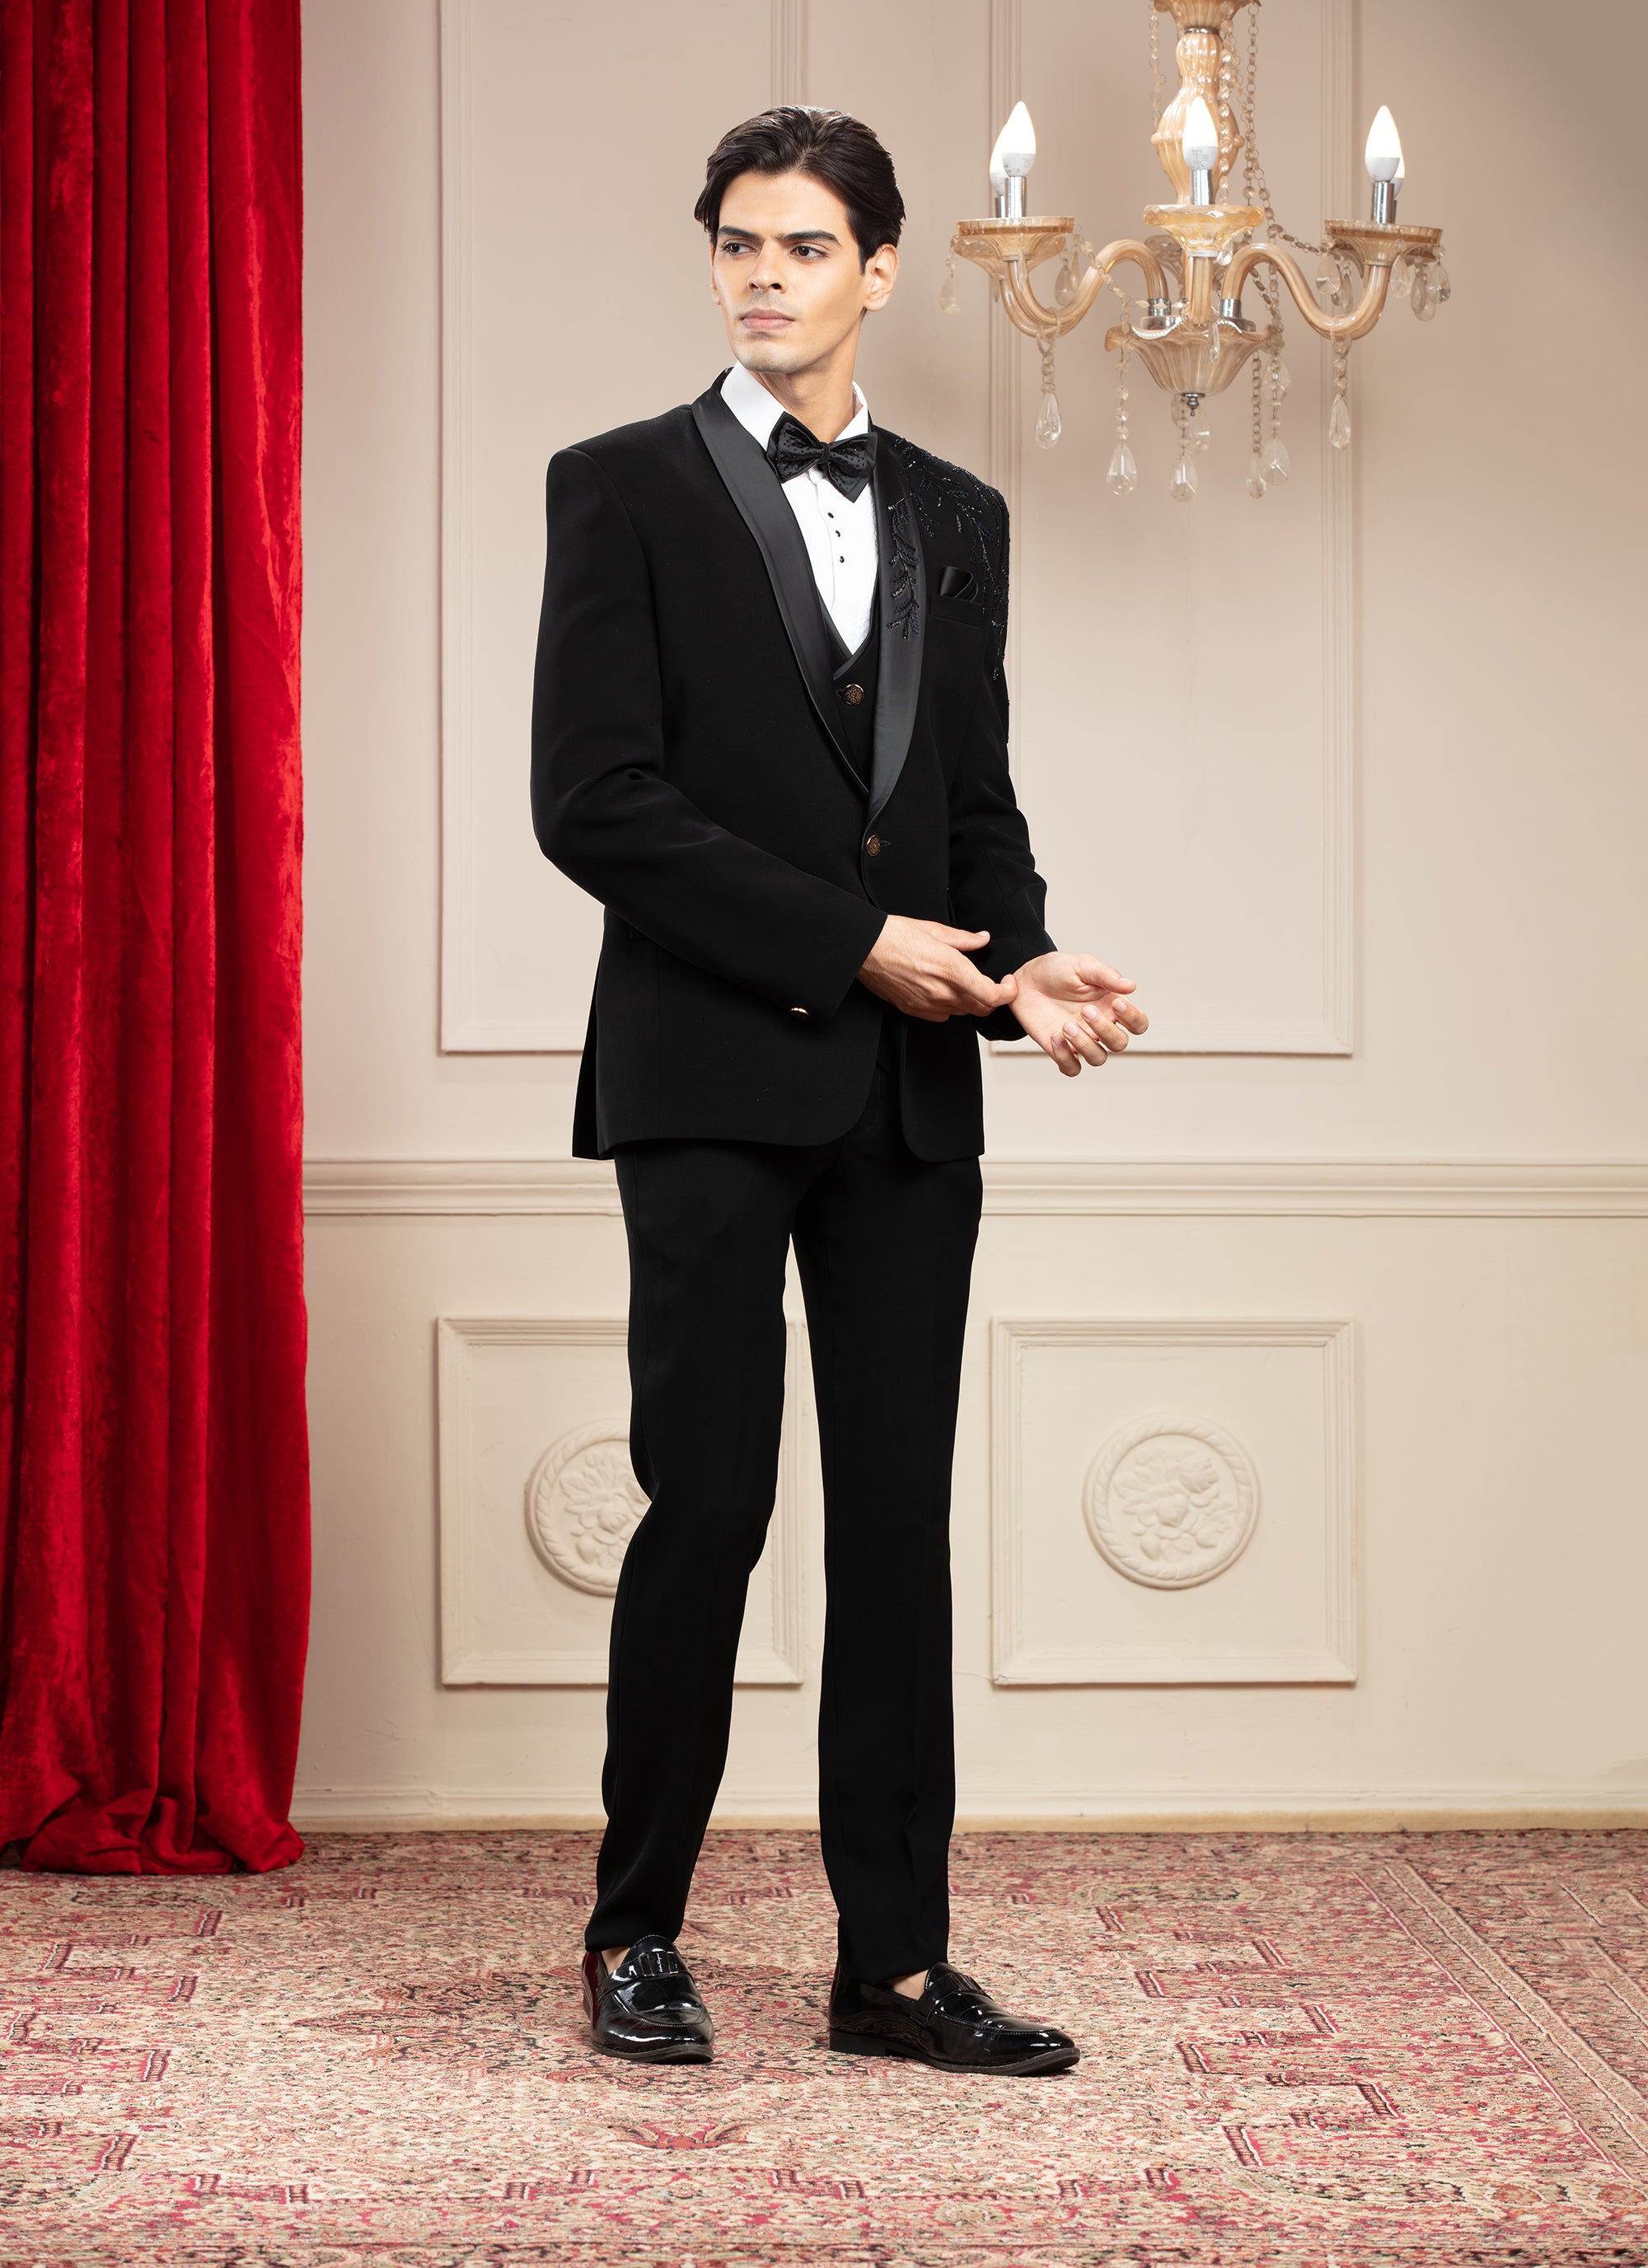 Jet Black Tuxedo with hand embroidery and bow tie